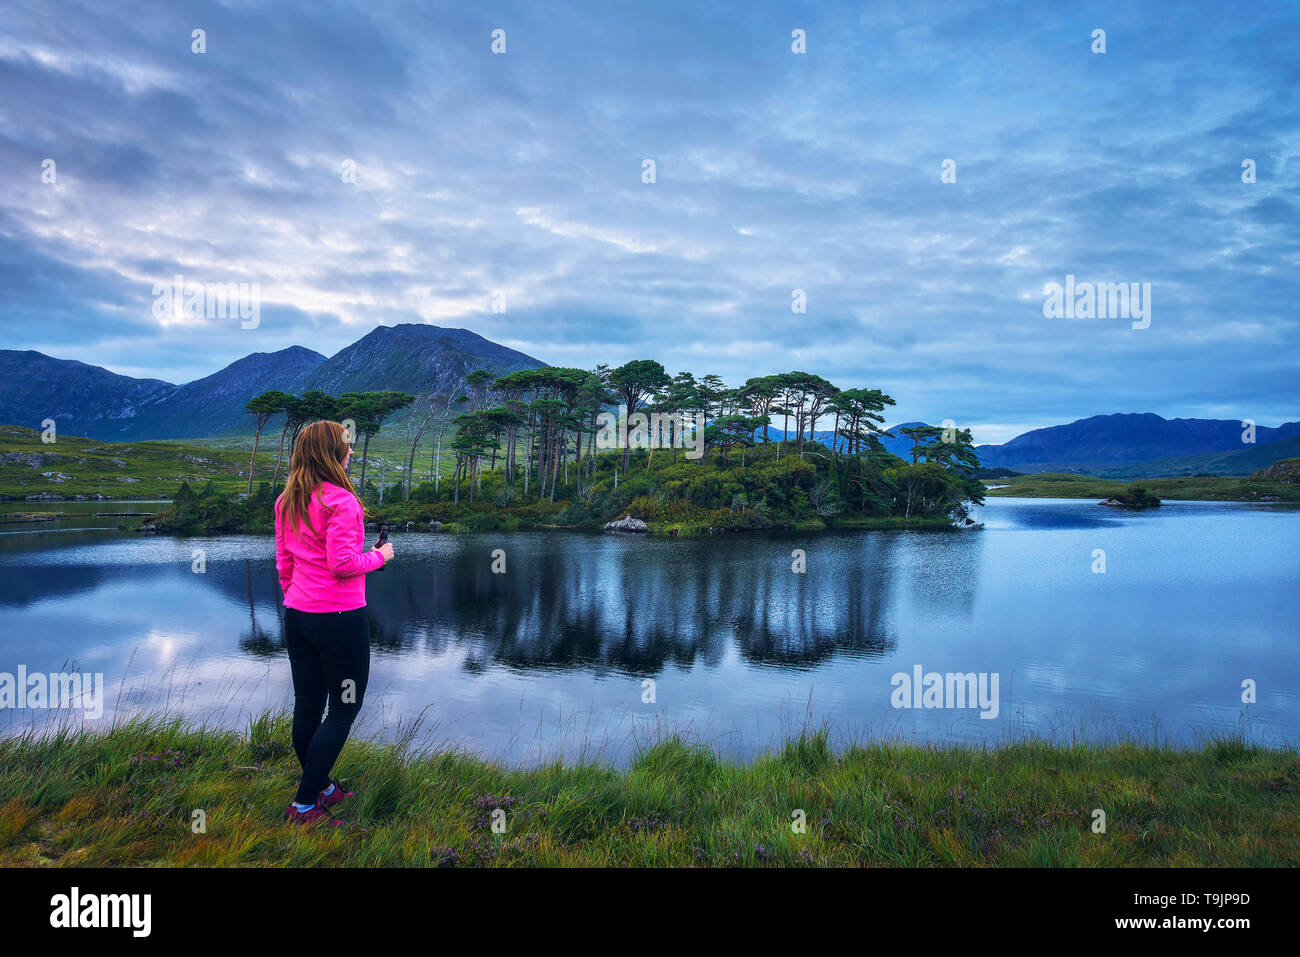 Young hiker at the Pine Island in Derryclare Lough Stock Photo